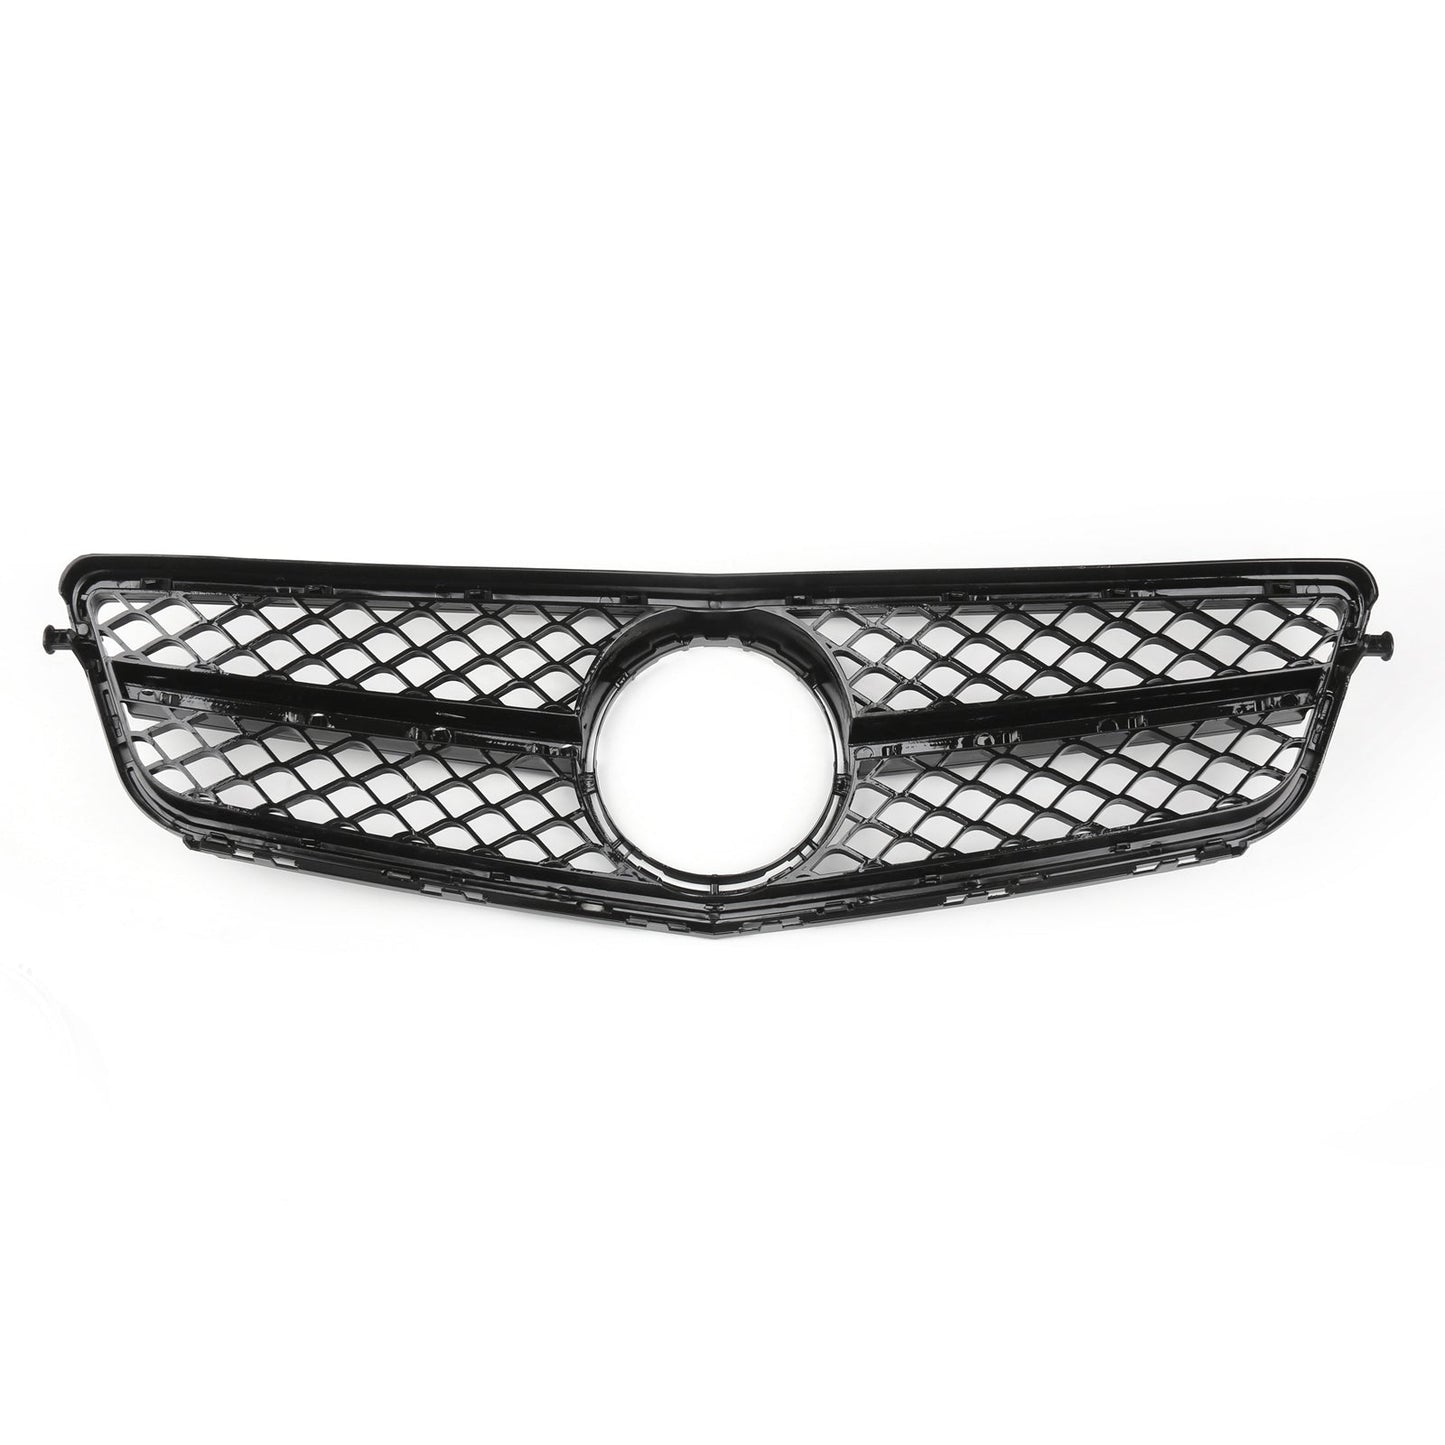 W204 C-Class 2008-2014 Benz C300 C350 Front Grill Gloss Black Car Grille C63 Style